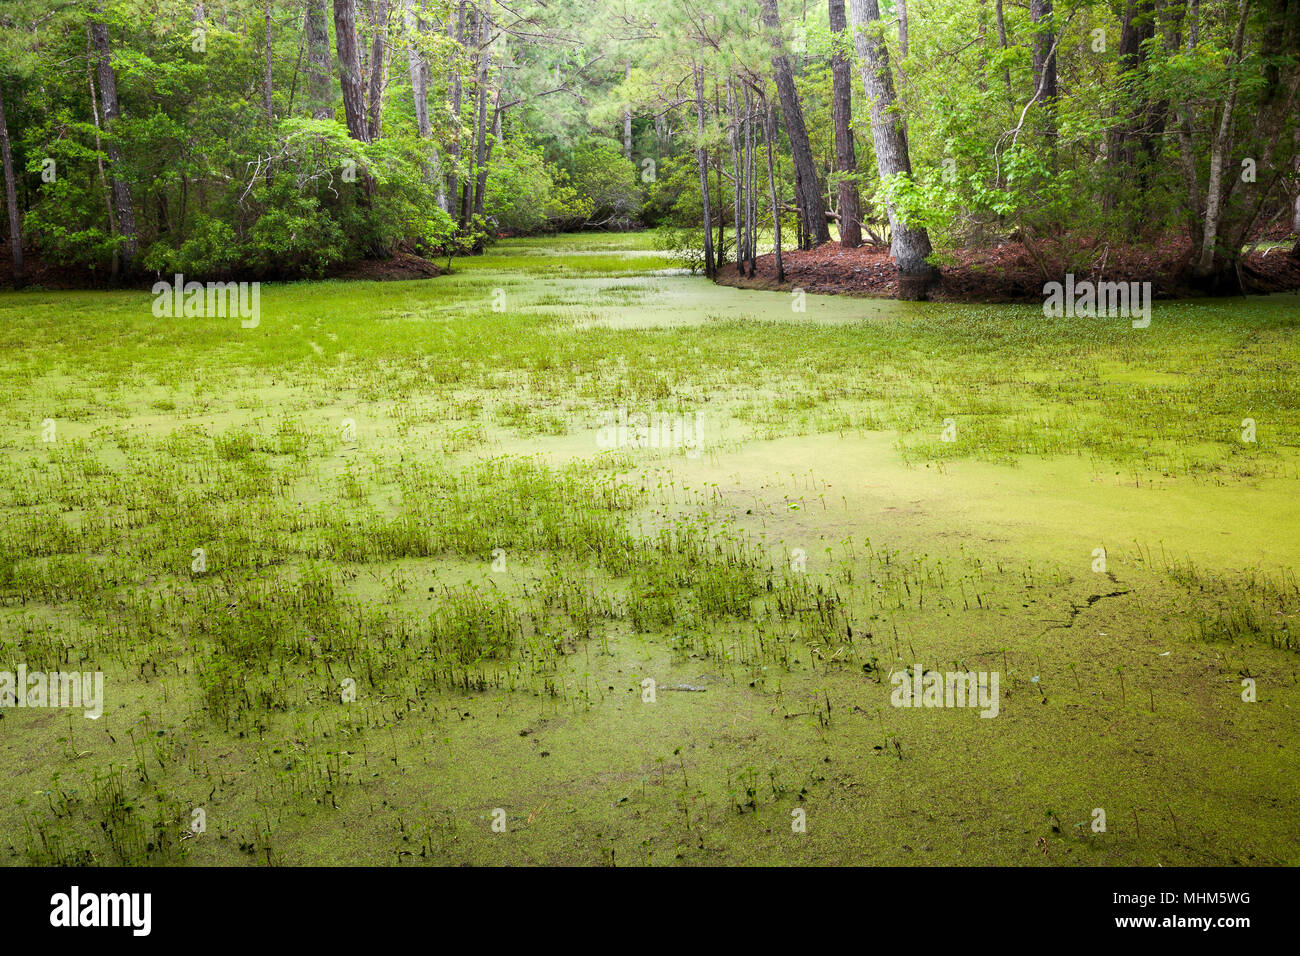 NC01775-00...NORTH CAROLINA - Pond along Center Loop Trail in Nags Head Woods, a Nature Conservancy Site and a National Natural Landmark located on th Stock Photo